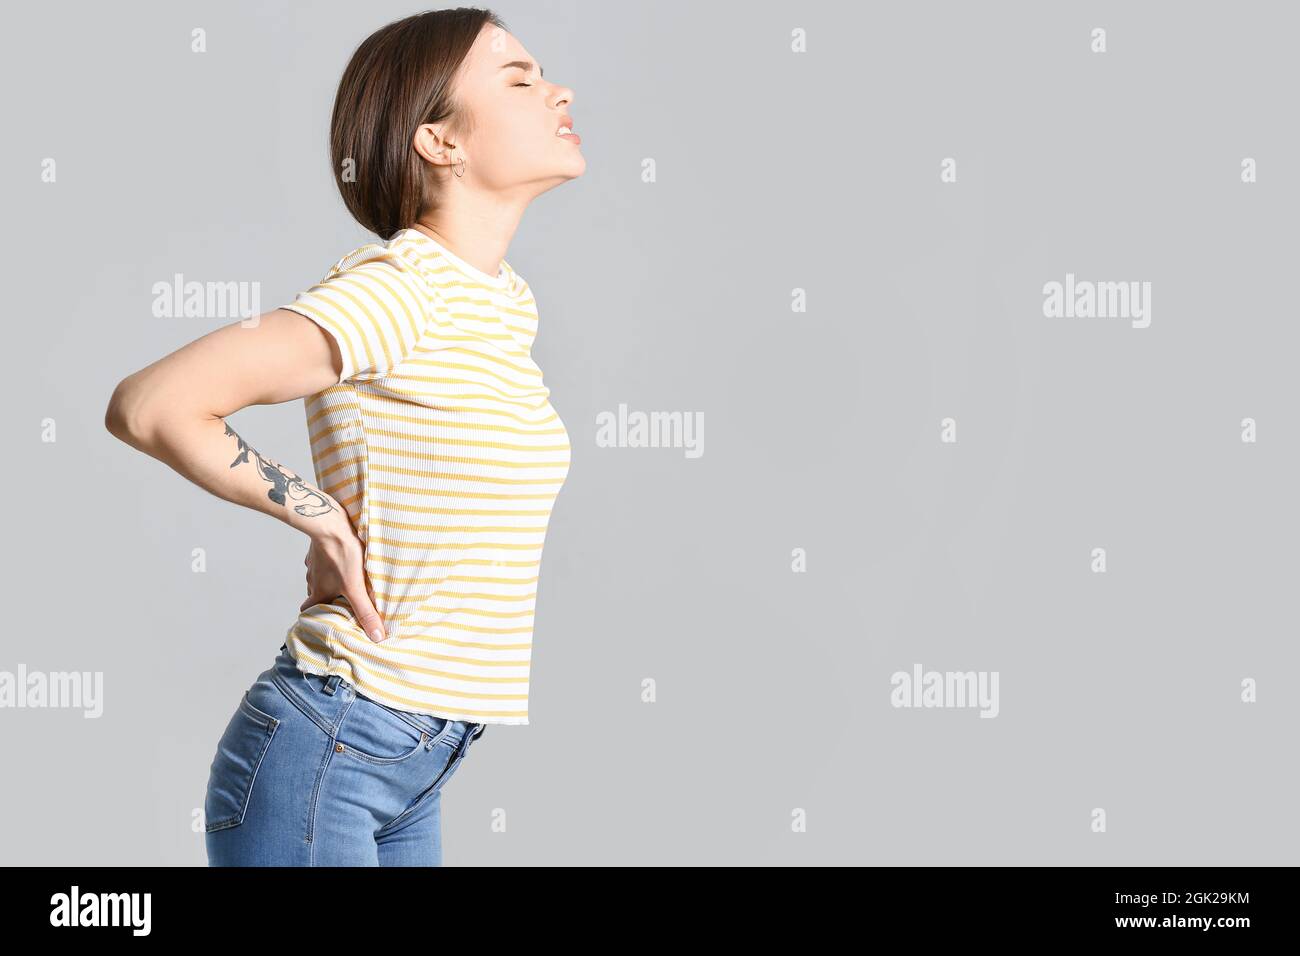 Young woman suffering from back pain on grey background Stock Photo